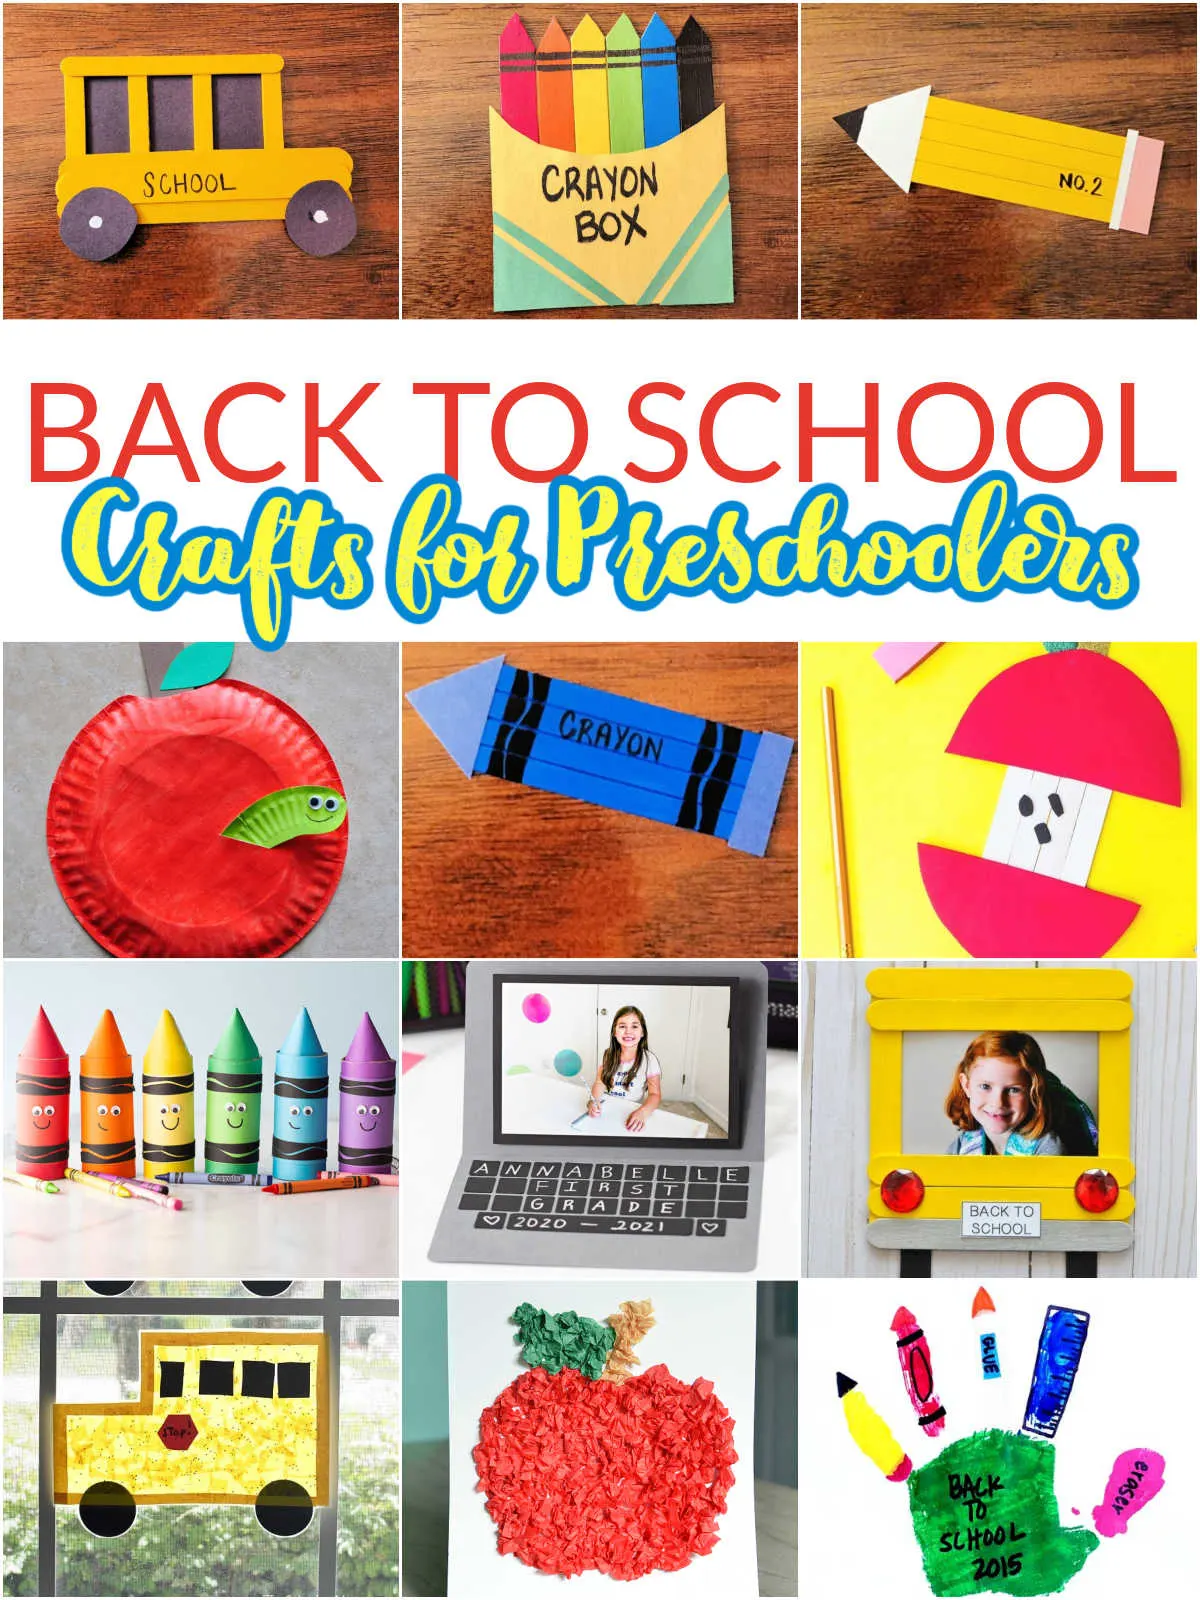 Collage of Back to School Crafts for Preschoolers